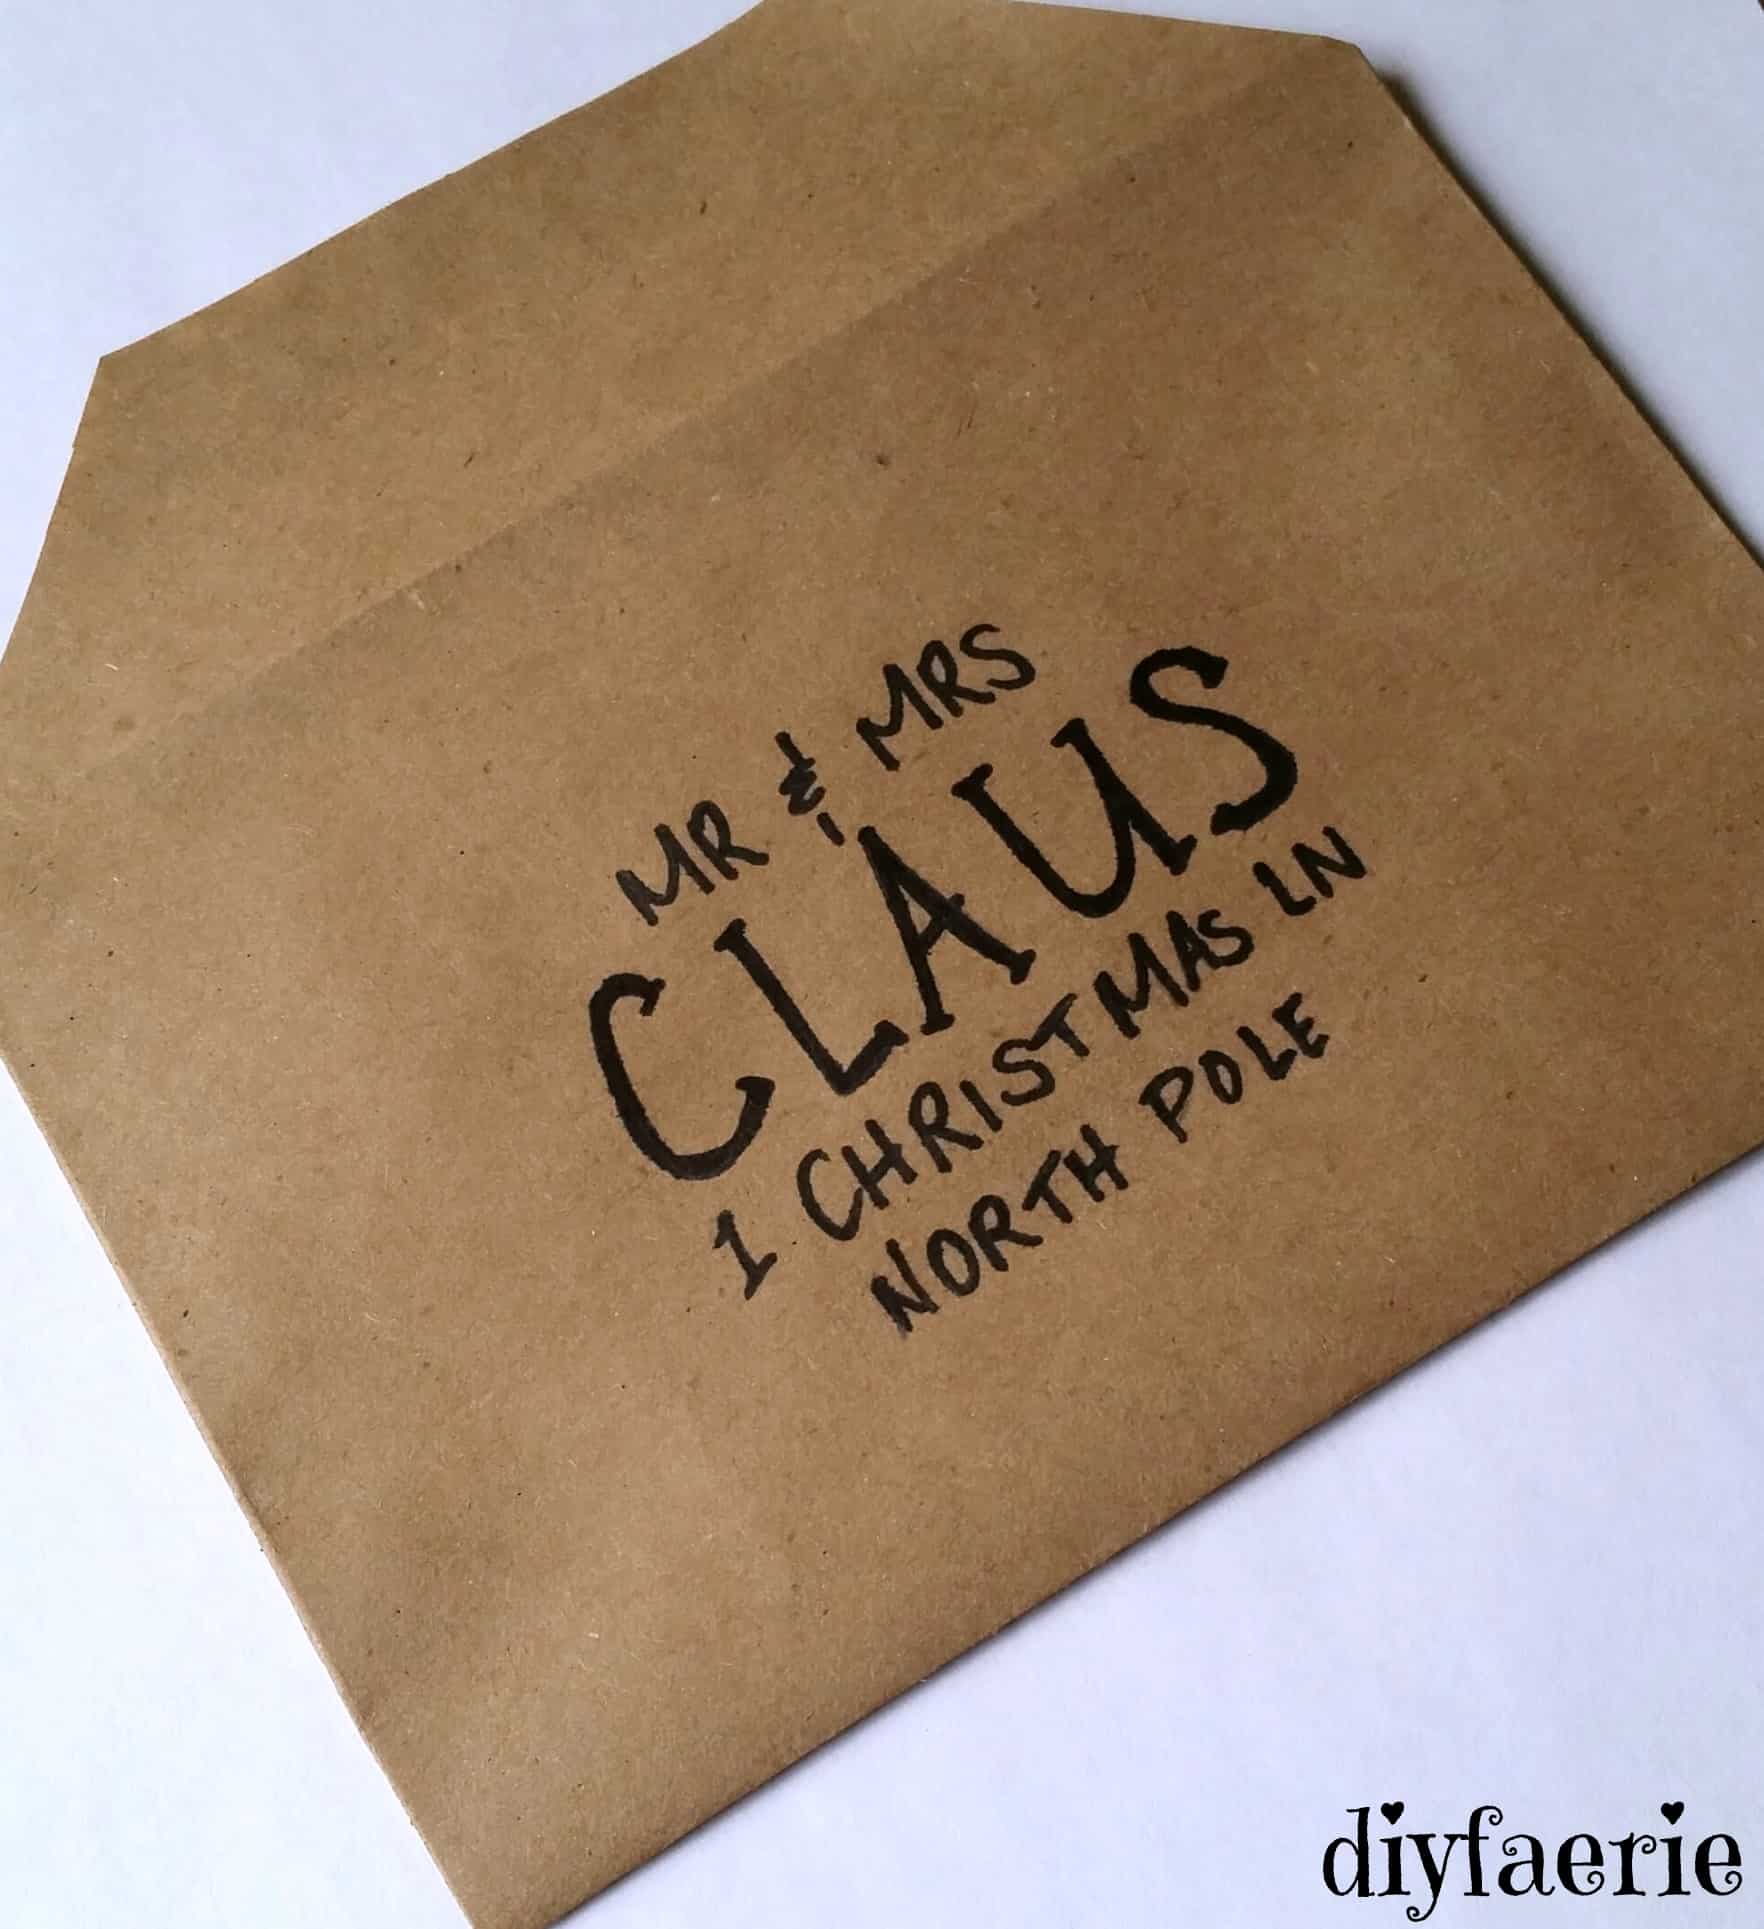 Kraft paper makes beautiful diy homemade envelopes for your Christmas cards!